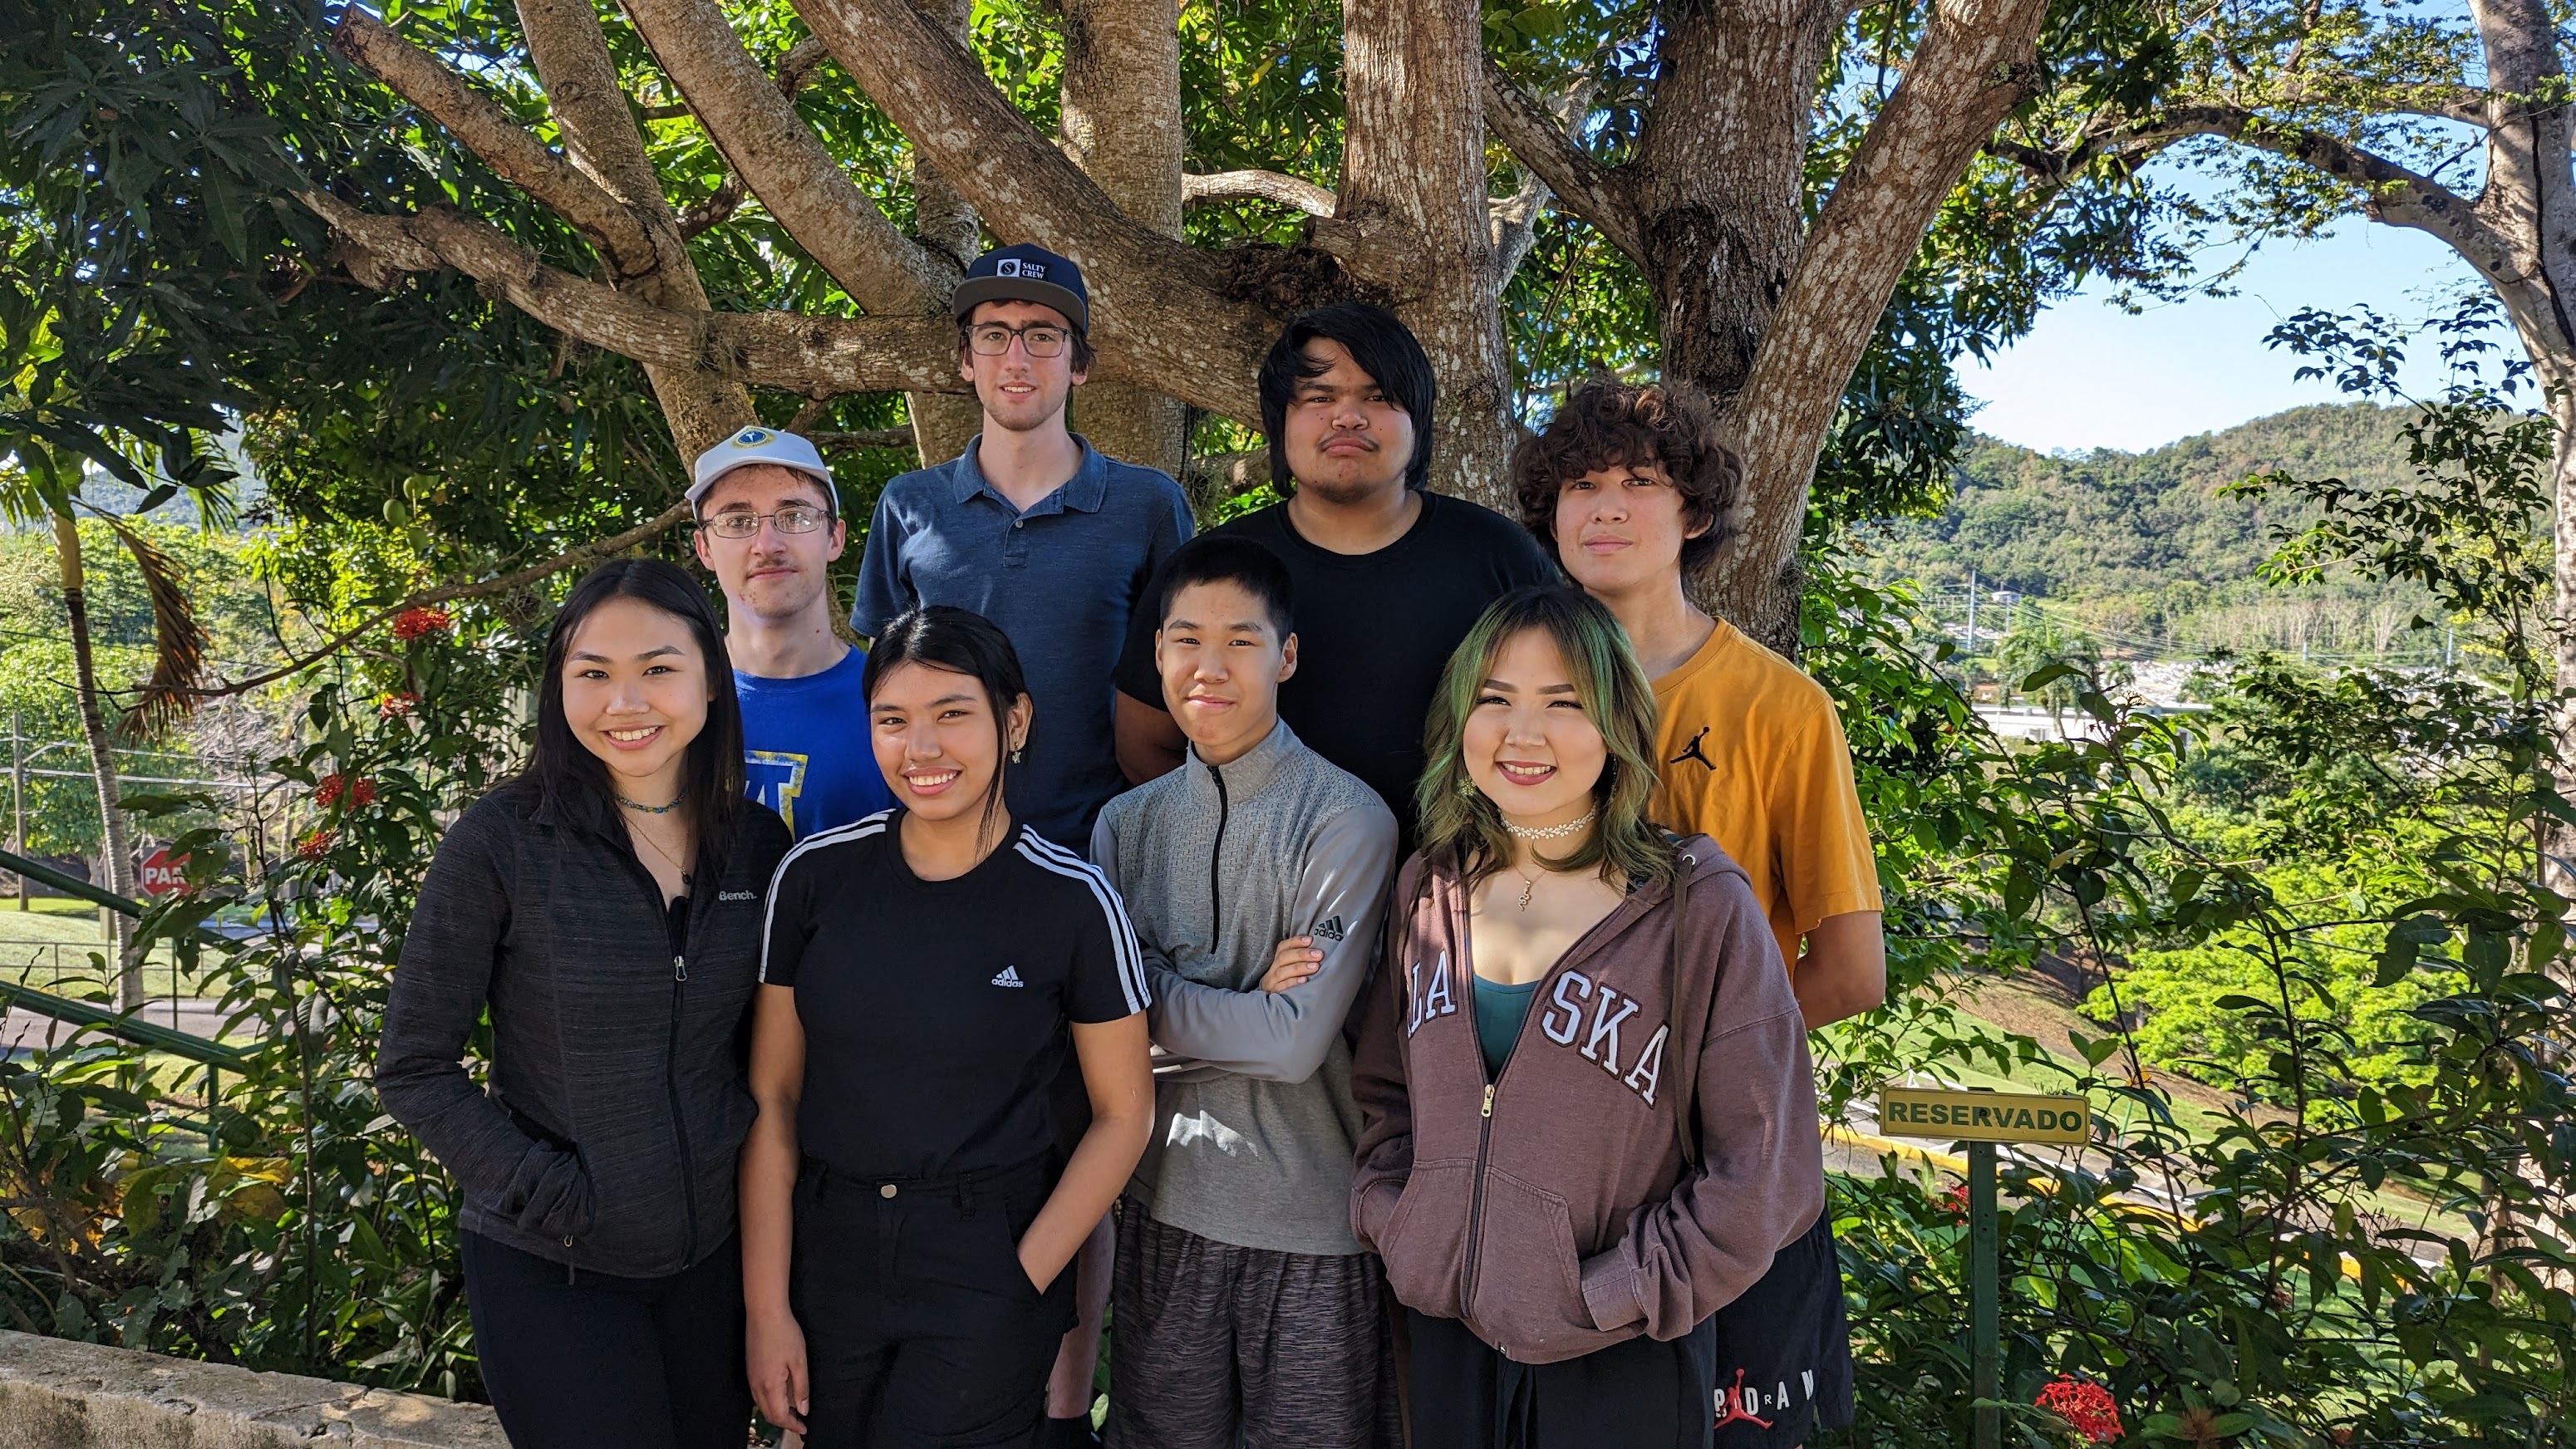 Eight high school students standing in front of tropical foliage and tree. 